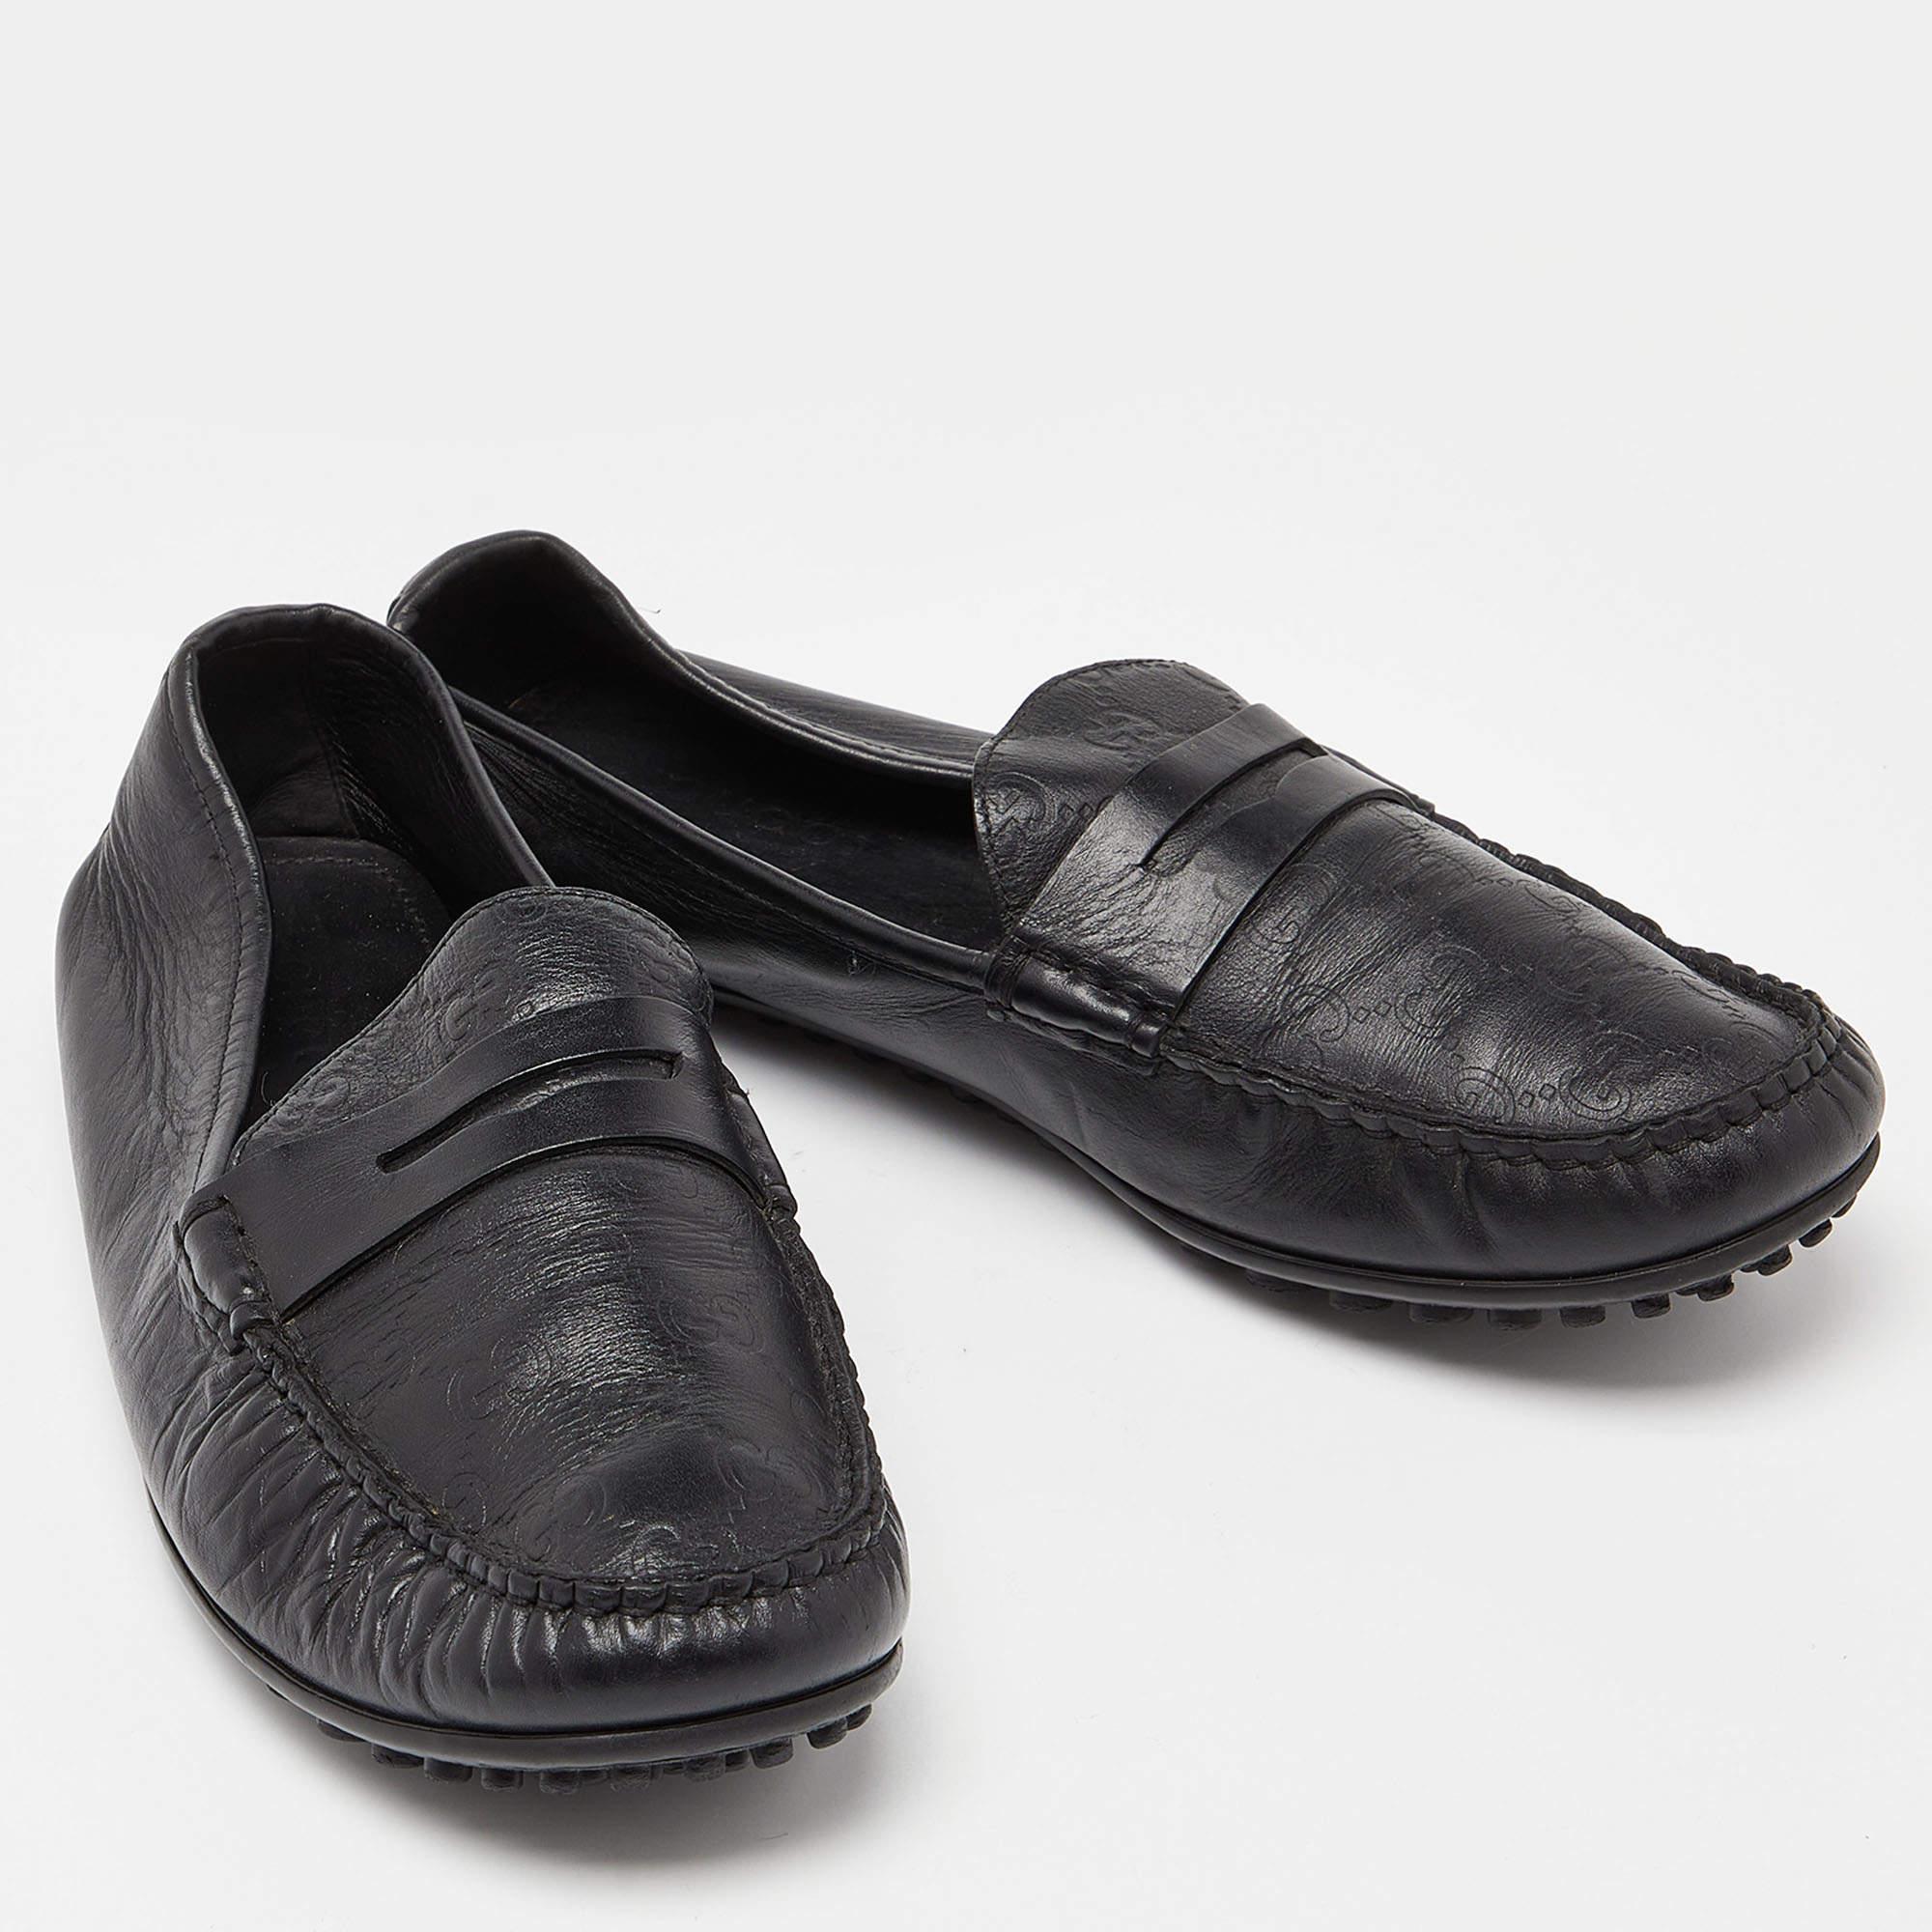 Gucci Black Guccissima Leather Penny Loafers Size 44 For Sale 3